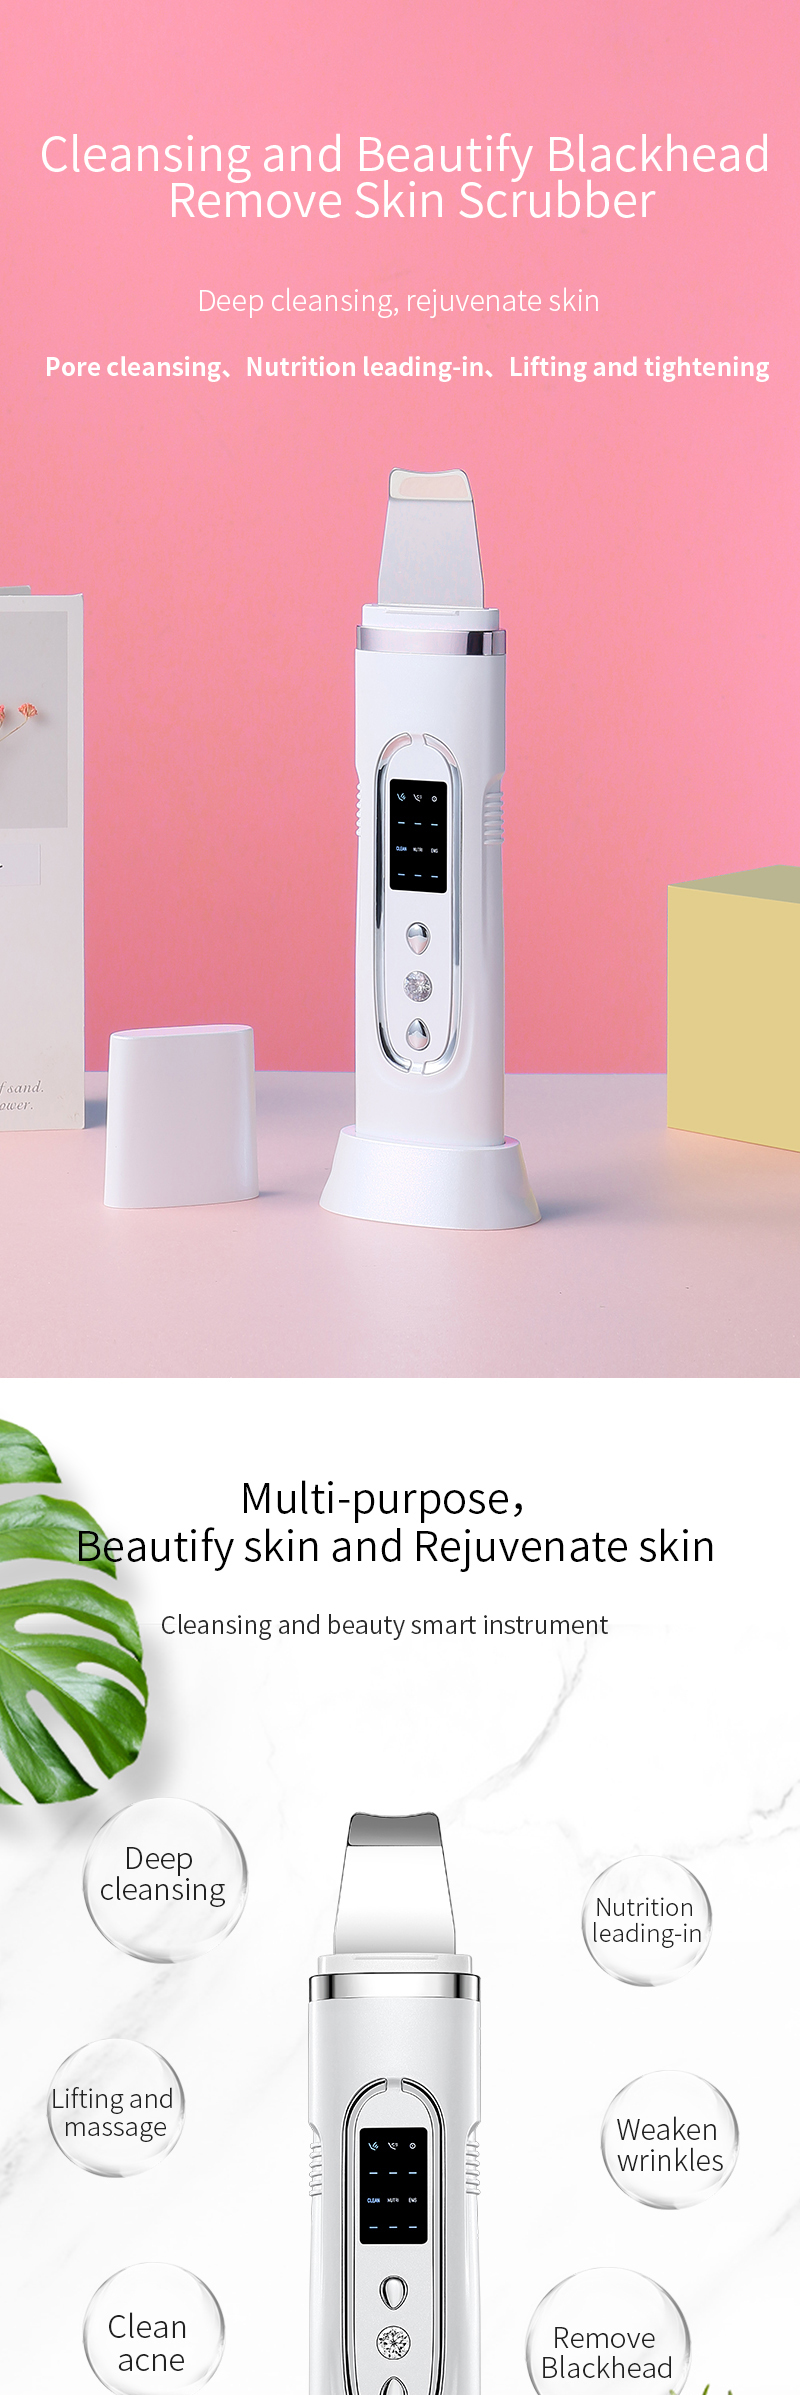 2020 Skin Tightening Feature Ultrasonic Skin Care Device Skin Scrubber Ultrasonic Peeling with stand and screen